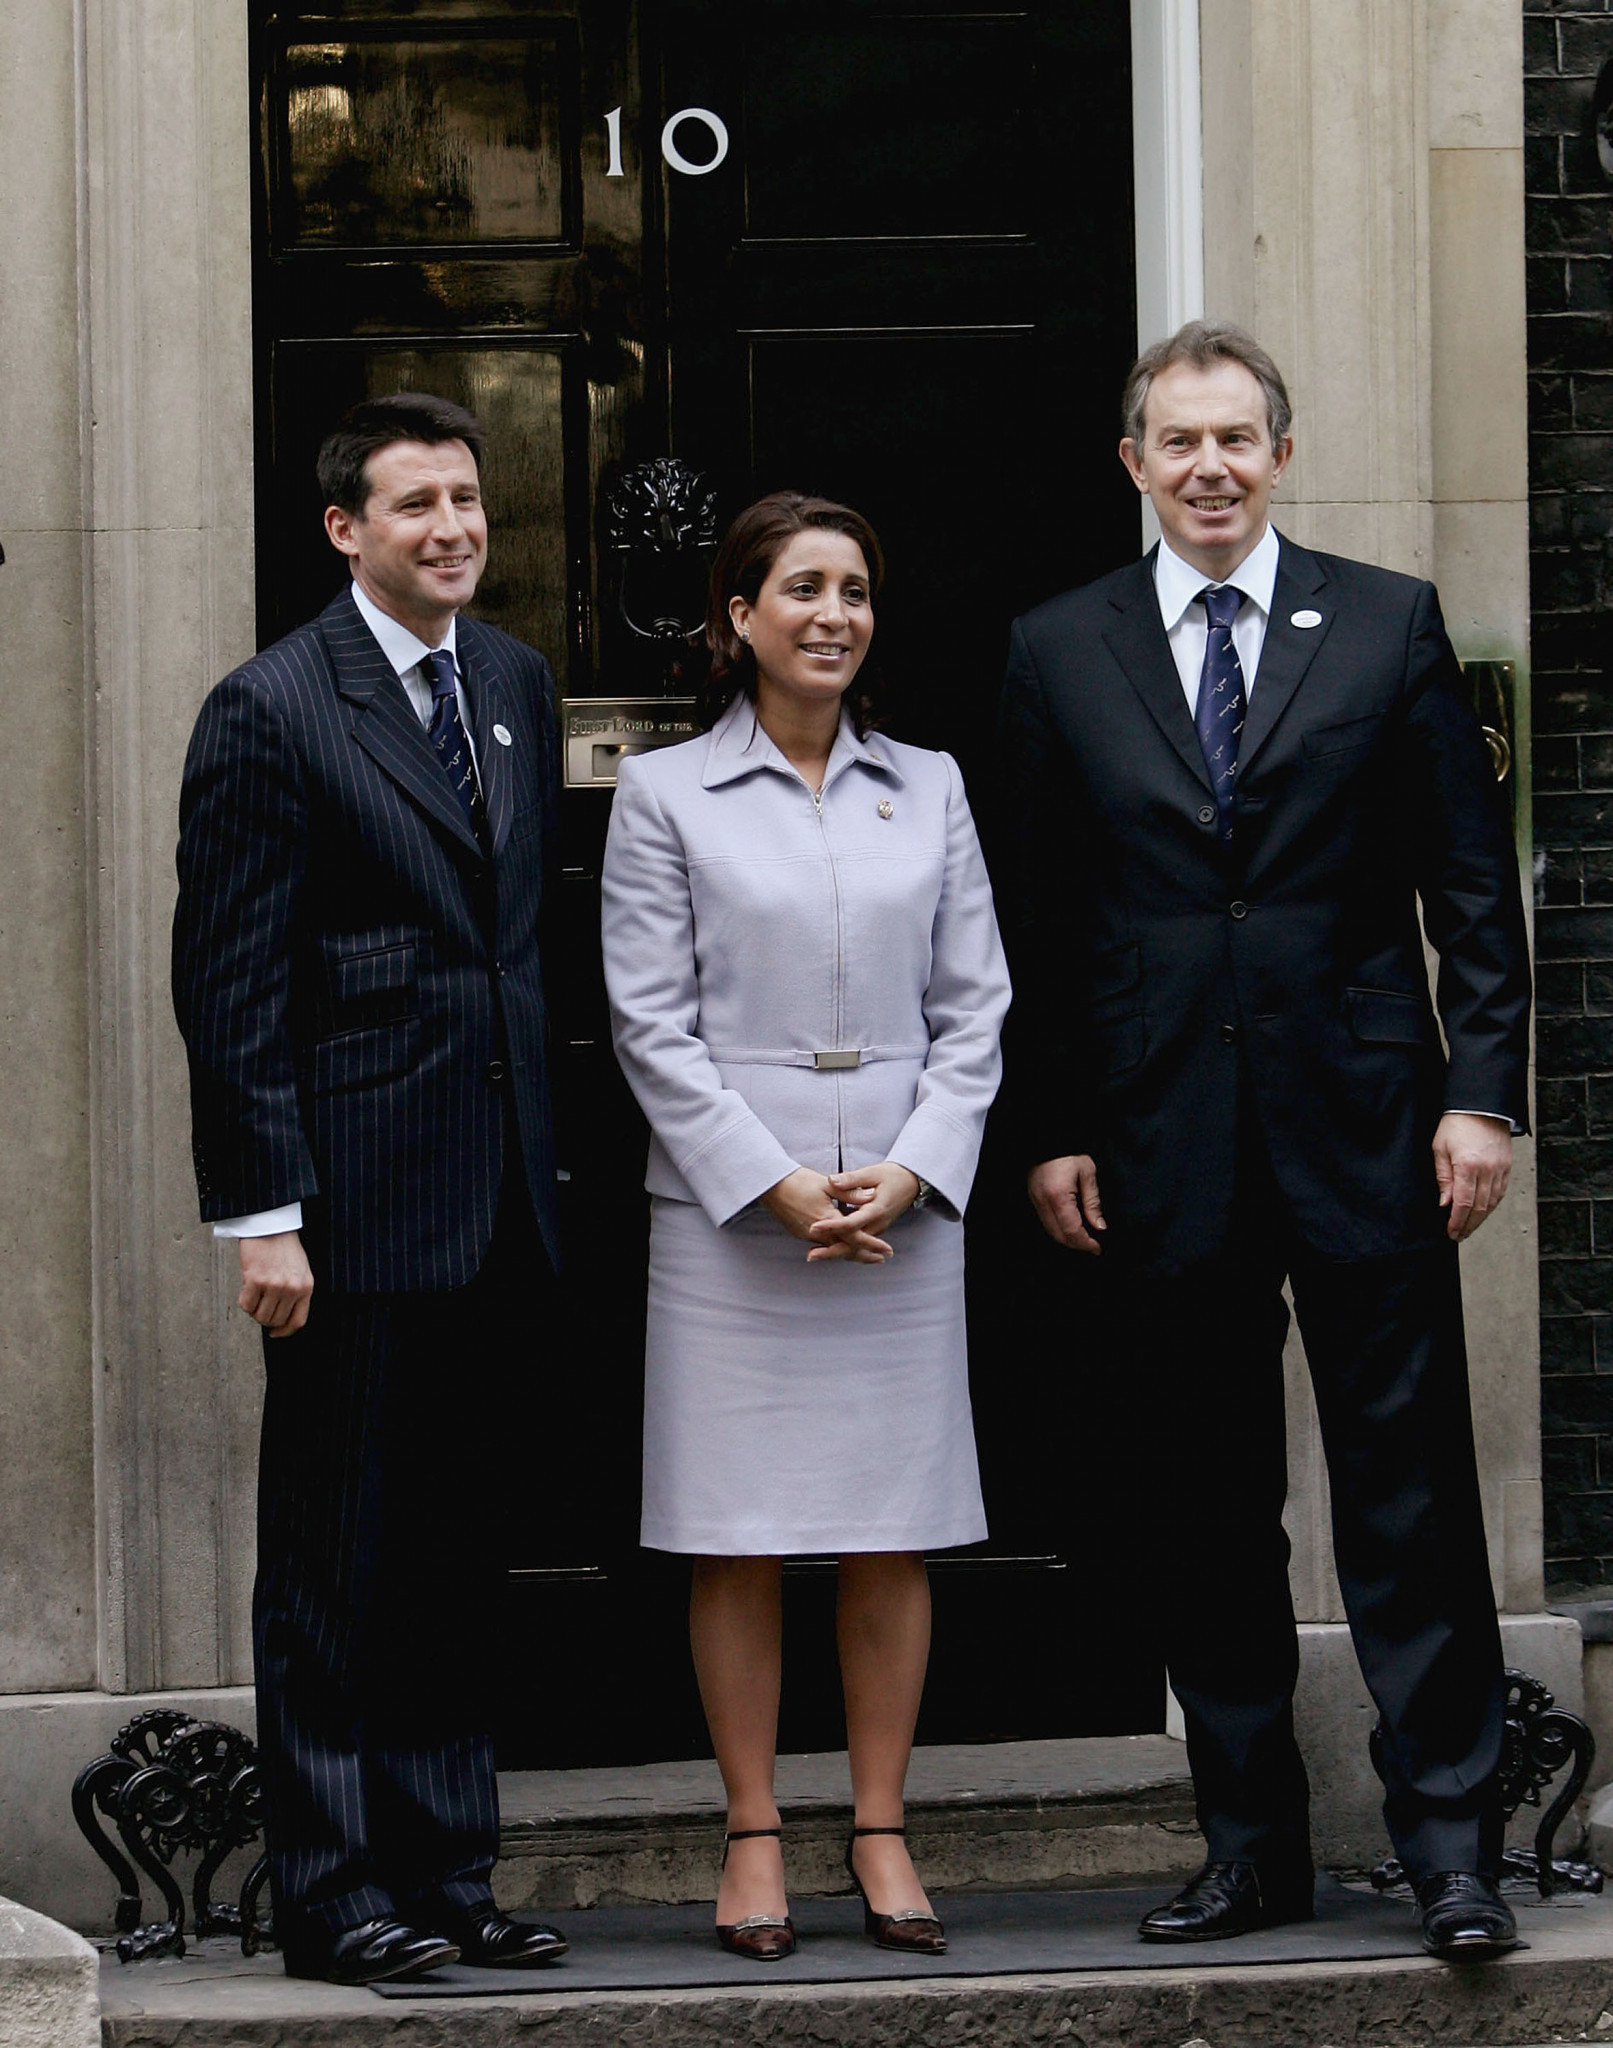 The IOC Evaluation Commission for the 2012 Olympics, led by Nawal El Moutawakel, were feted by the Queen and Prime Minister Tony Blair during their visit to London in 2005 ©Getty Images